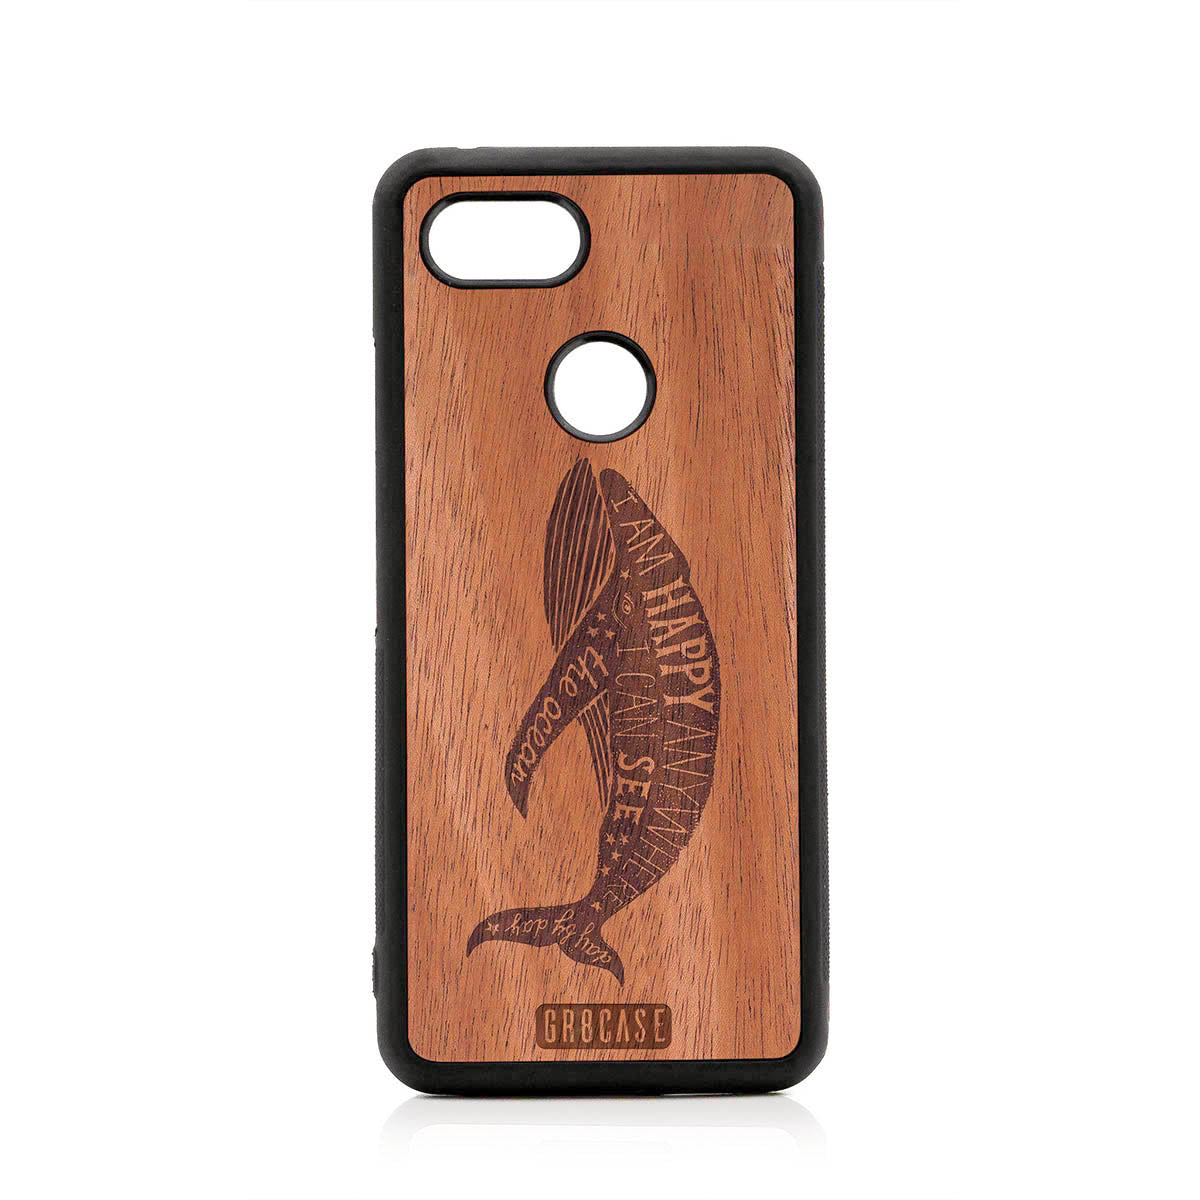 I'm Happy Anywhere I Can See The Ocean (Whale) Design Wood Case For Google Pixel 3